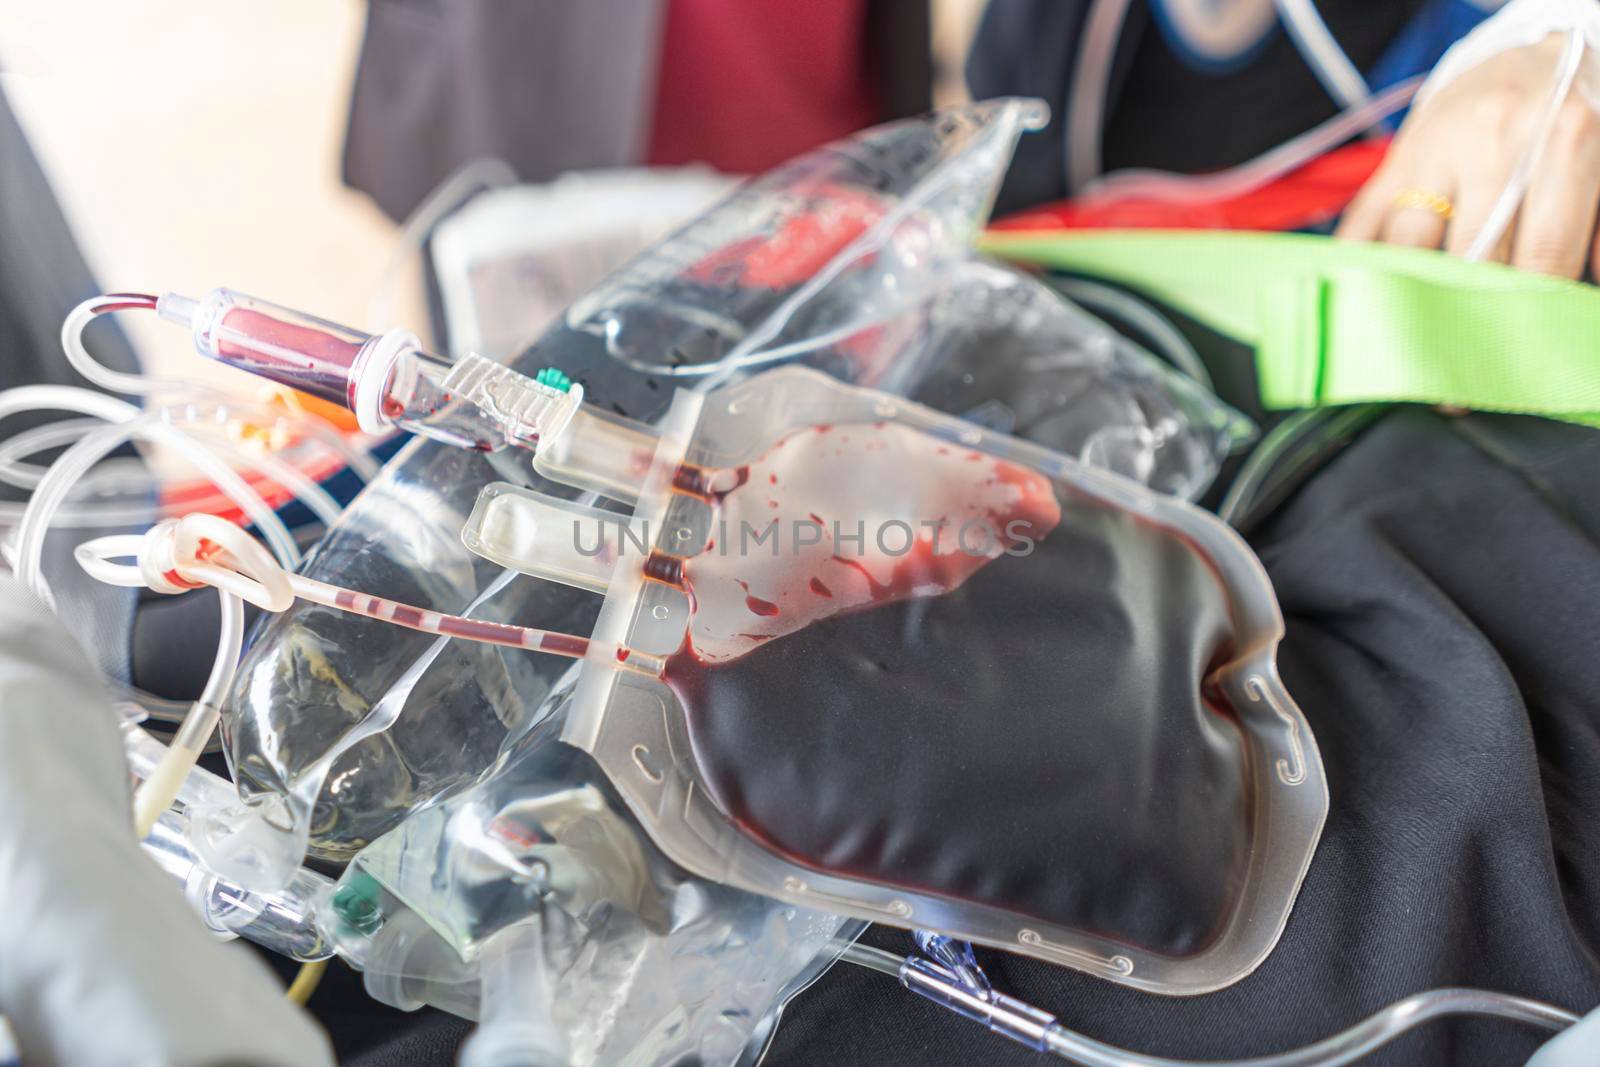 Blood bag for emergency patients who have lost a lot of blood. by sandyman